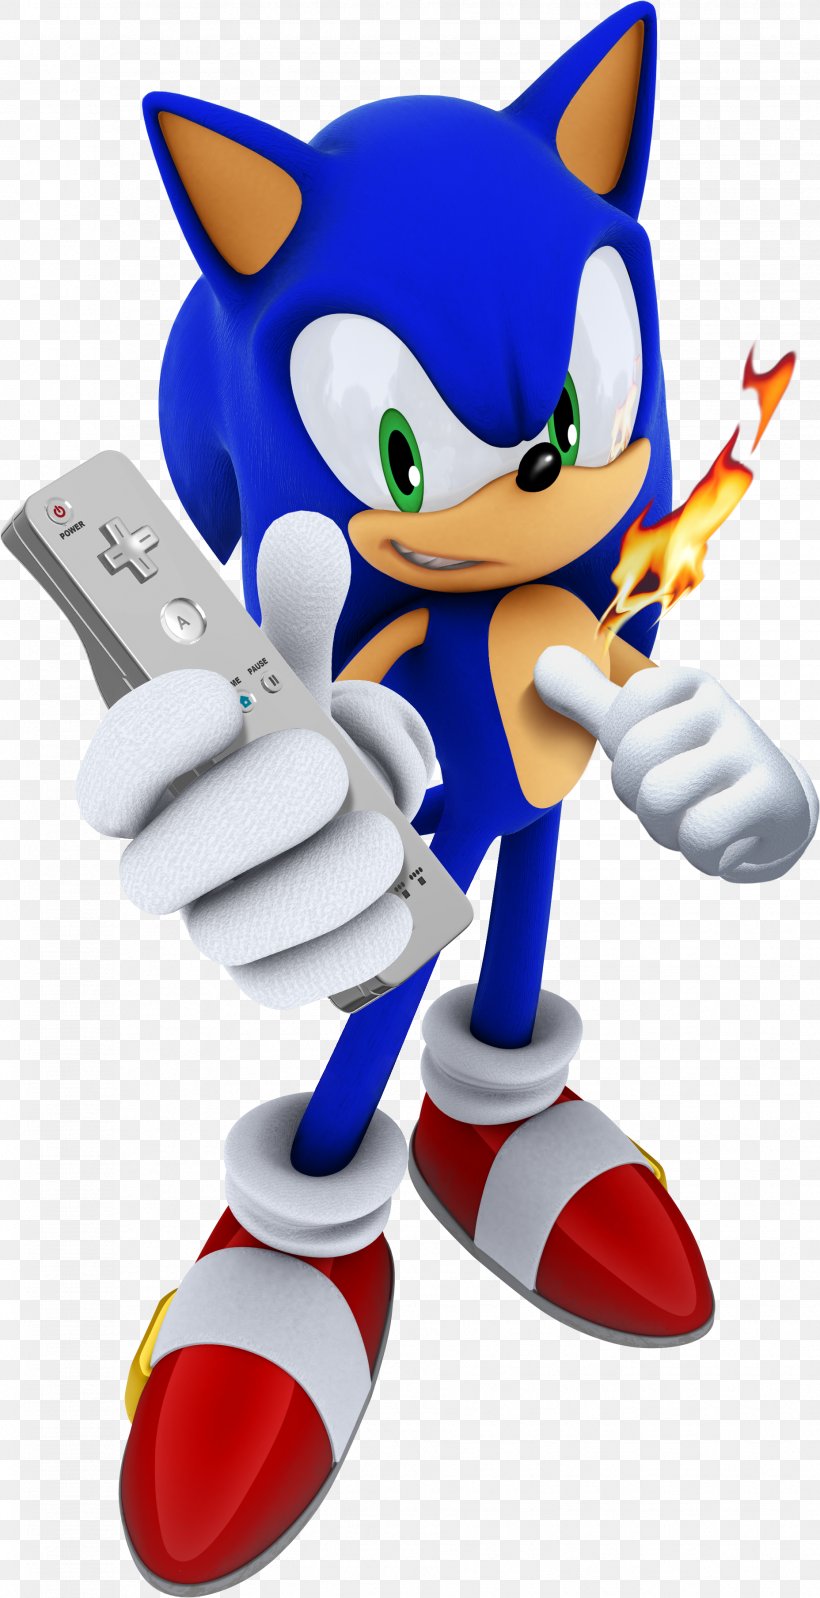 Sonic And The Secret Rings Sonic The Hedgehog Sonic And The Black Knight Sonic Colors Sonic Adventure, PNG, 1856x3619px, Sonic And The Secret Rings, Action Figure, Cartoon, Fictional Character, Figurine Download Free